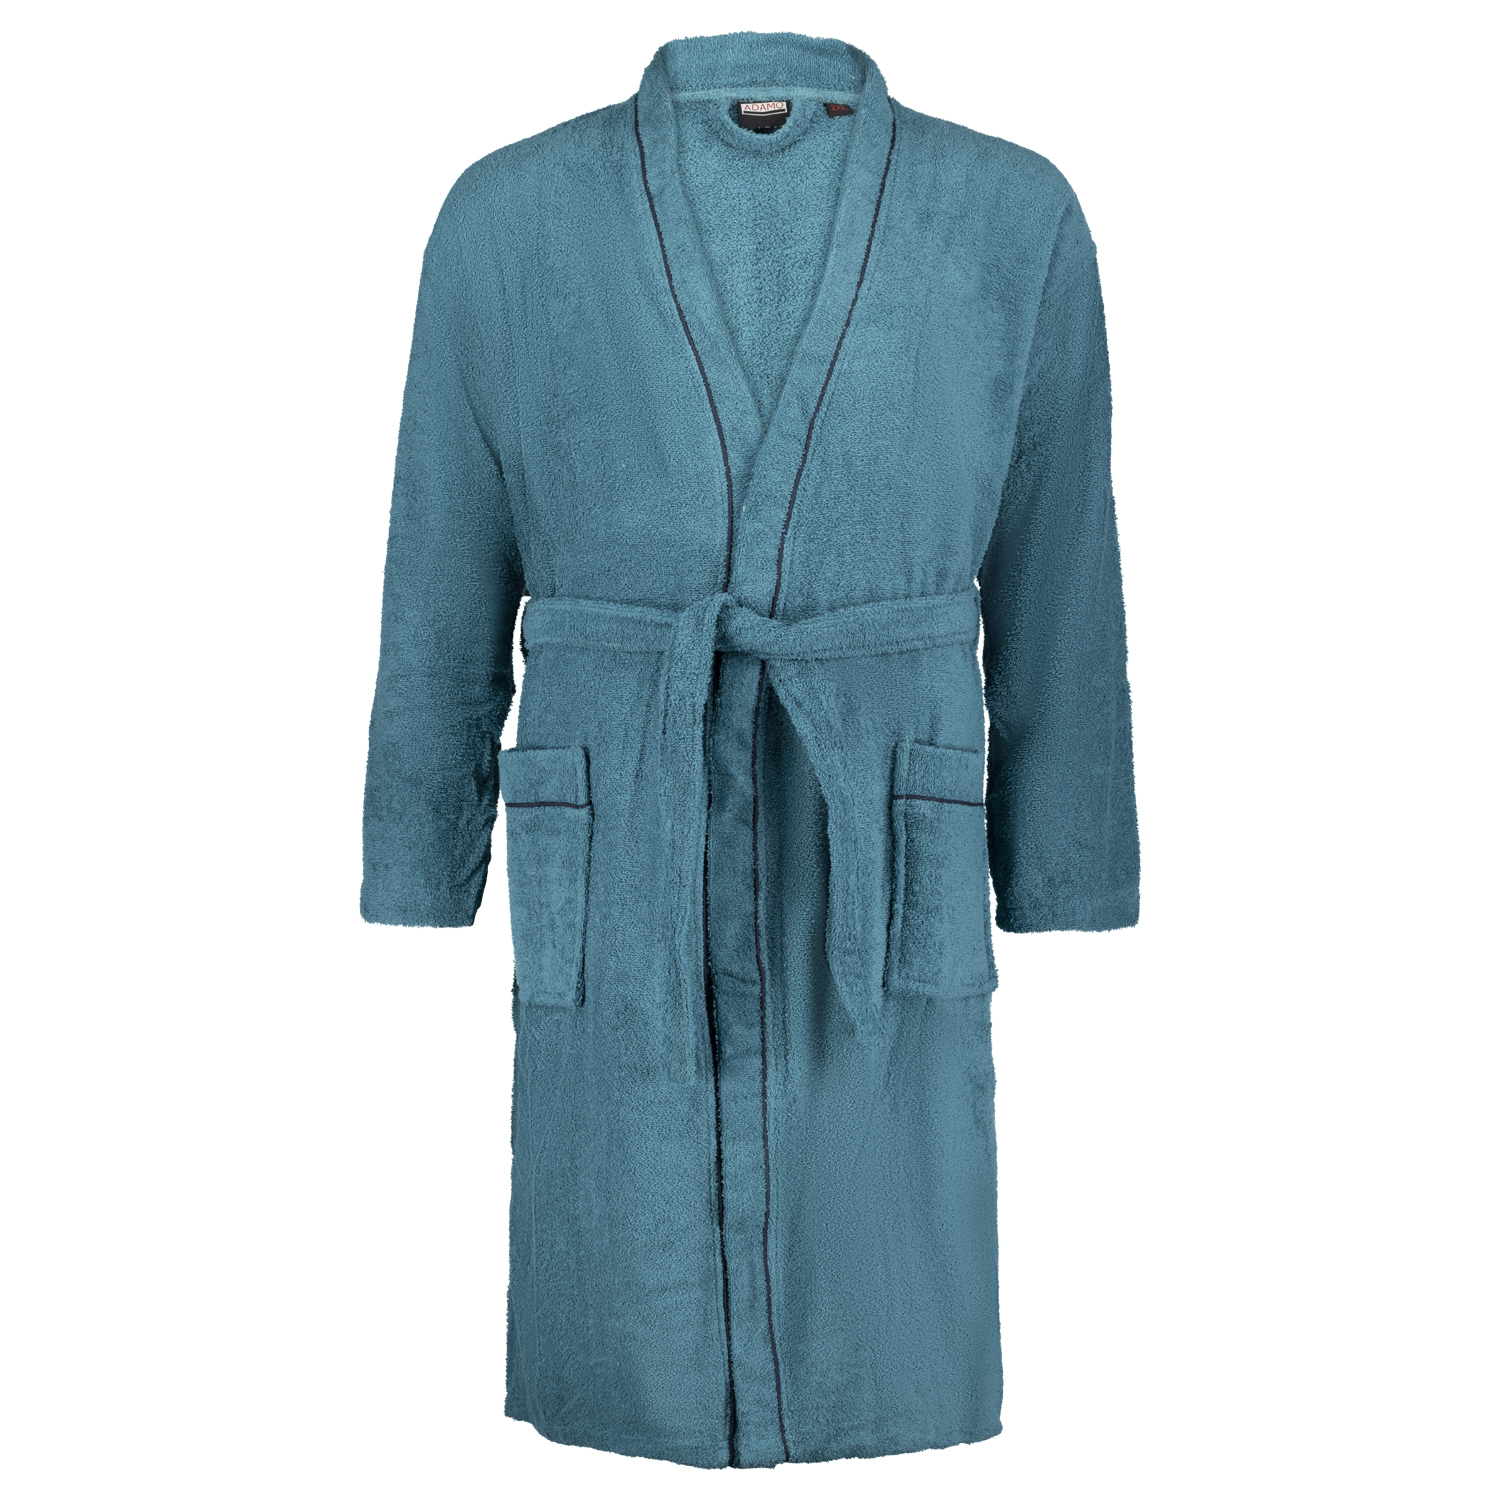 Bathrobe for men in petrol series JOEY by ADAMO up to oversize 12XL